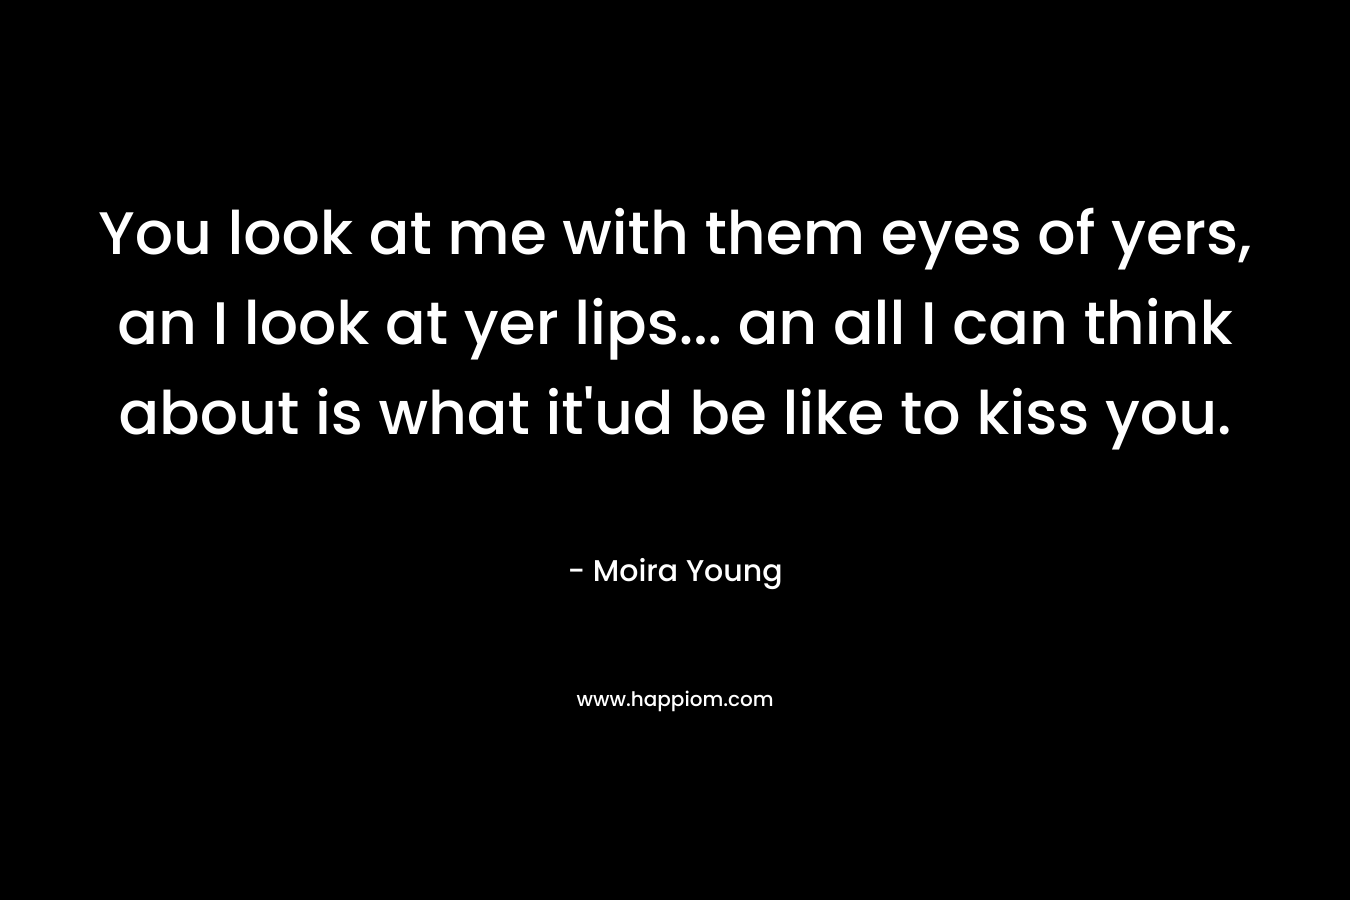 You look at me with them eyes of yers, an I look at yer lips... an all I can think about is what it'ud be like to kiss you.